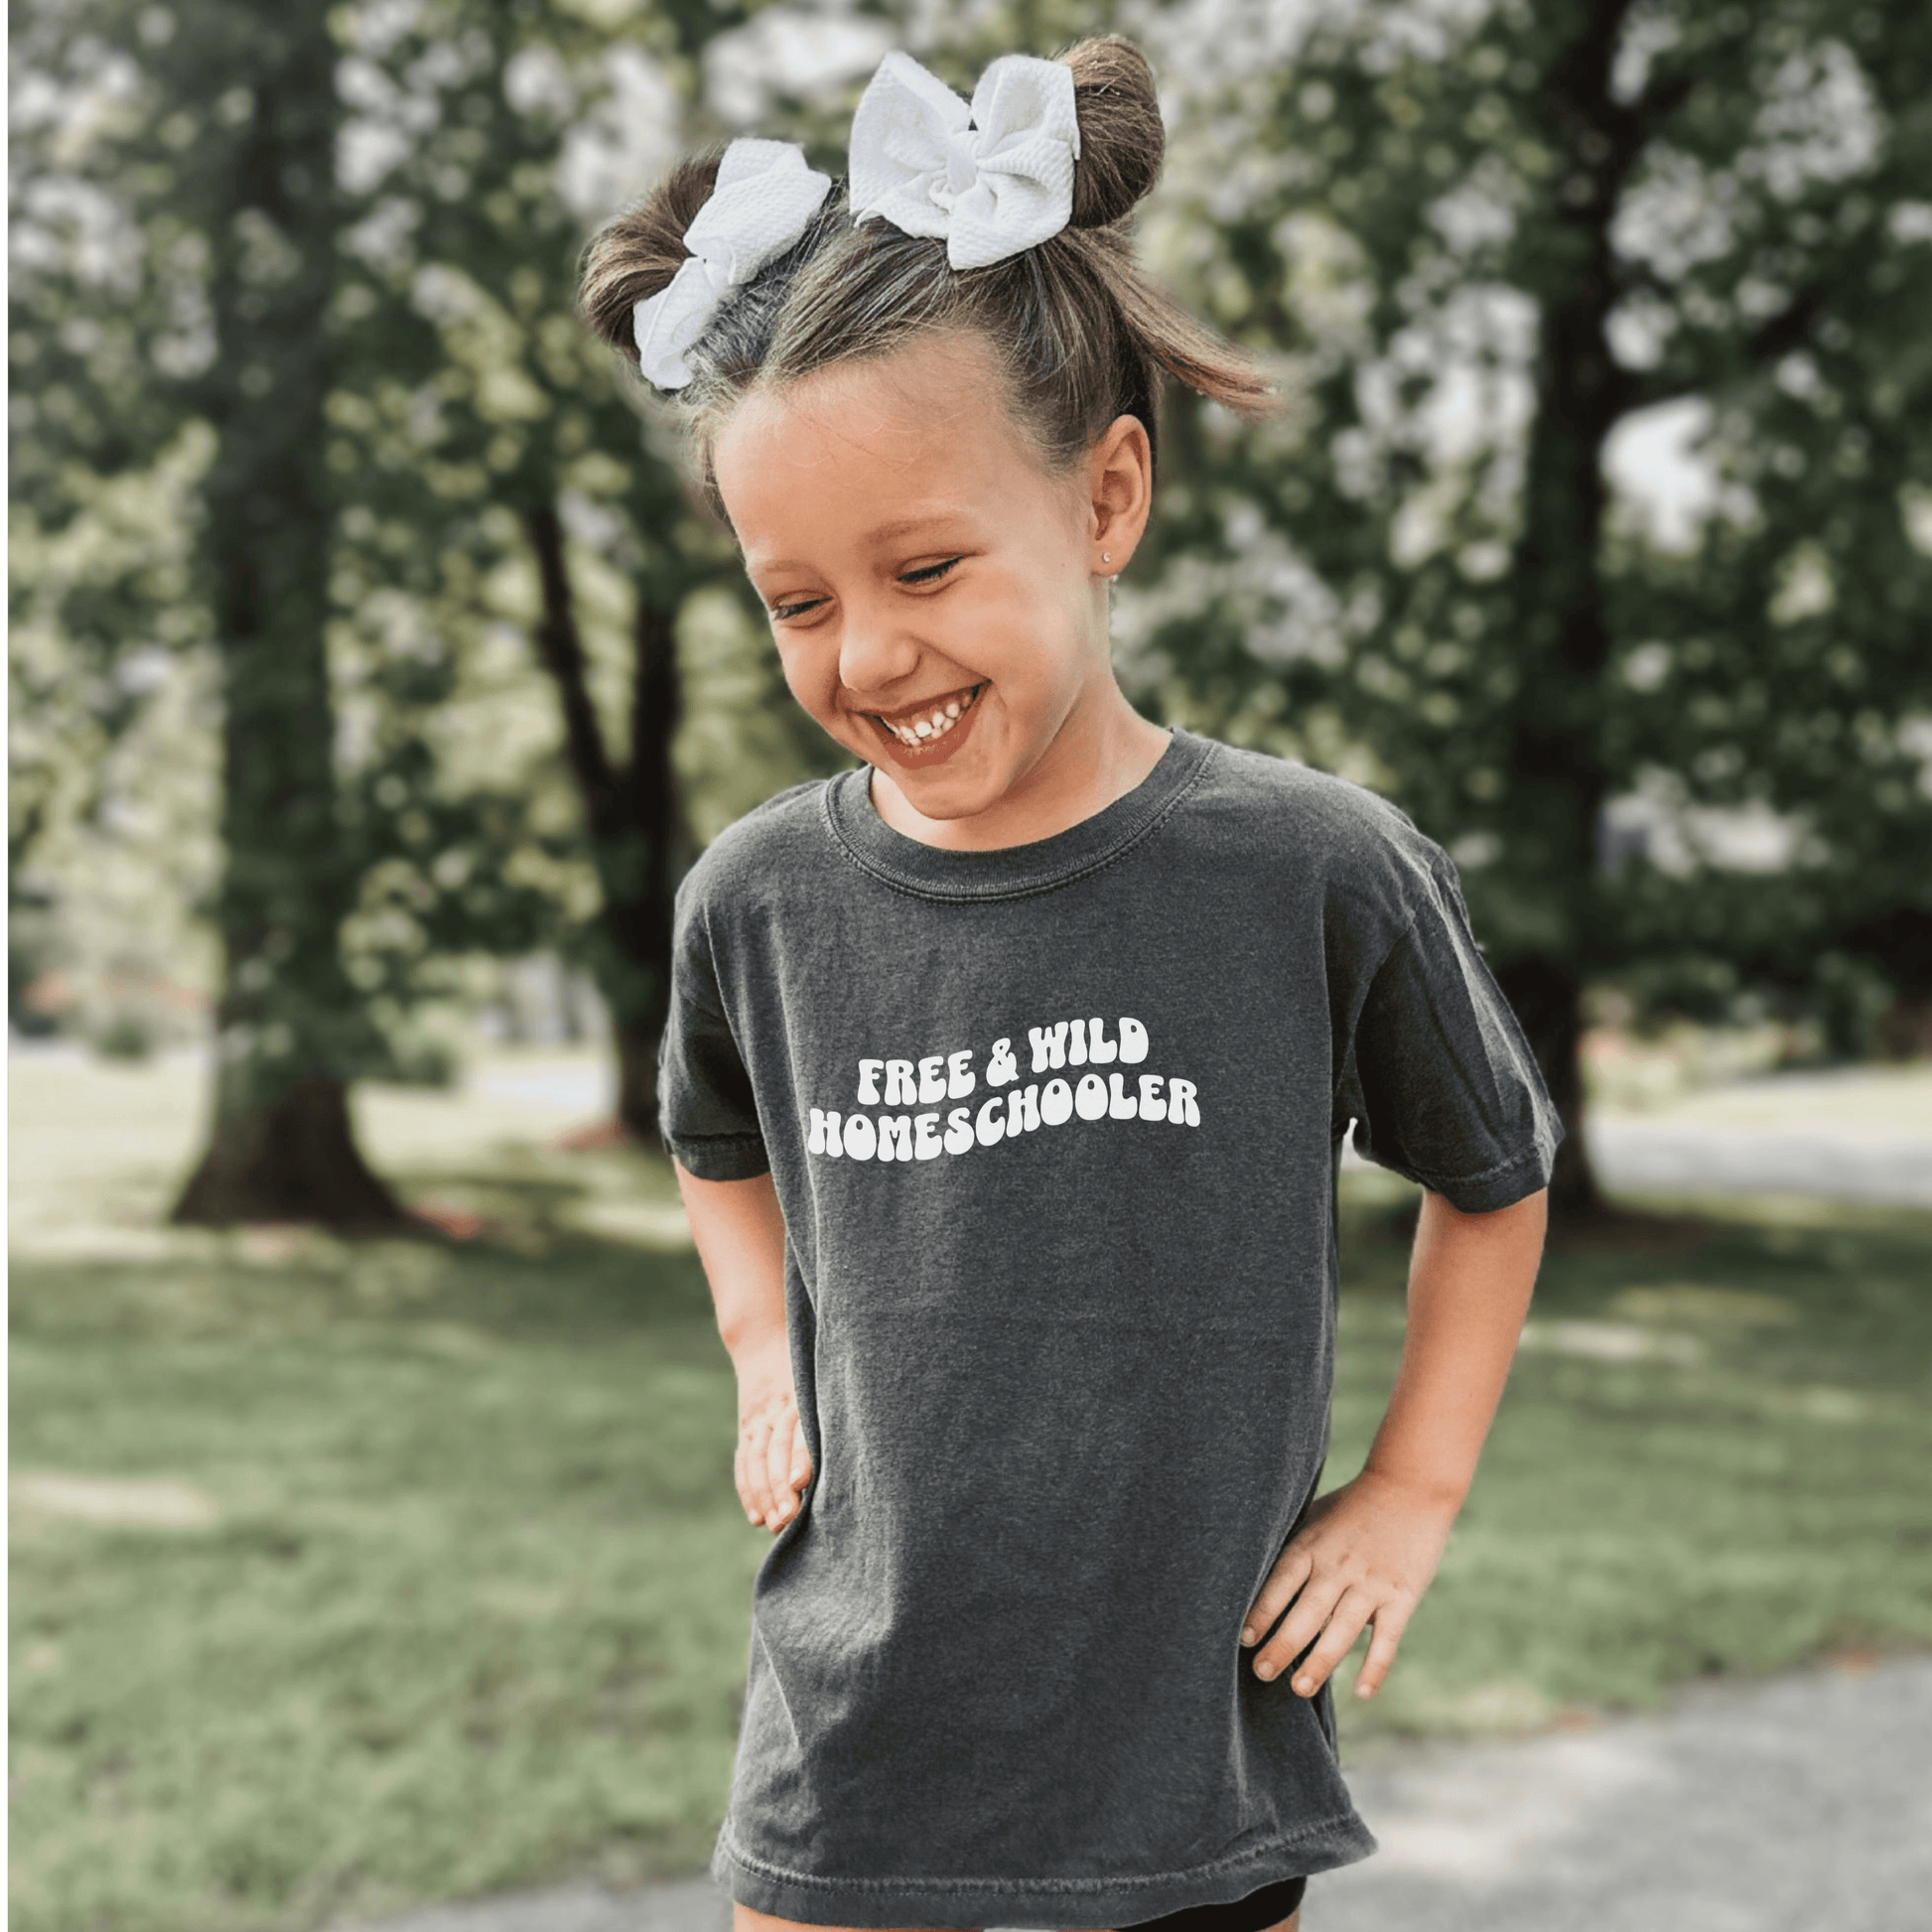 Free & Wild Homeschooler Kids Midweight Tee ShirtWolfe Paw DesignsFree & Wild Homeschooler Kids Midweight Tee ShirtA bright colored tee for your homeschooler.
100% combed ringspun cottonComfort Colors Tee



 
XS
S
M
L
XL




Width, in
13.50
14.50
16.50
17.50
19.50


Length, in
1Free & Wild Homeschooler Kids Midweight Tee Shirt